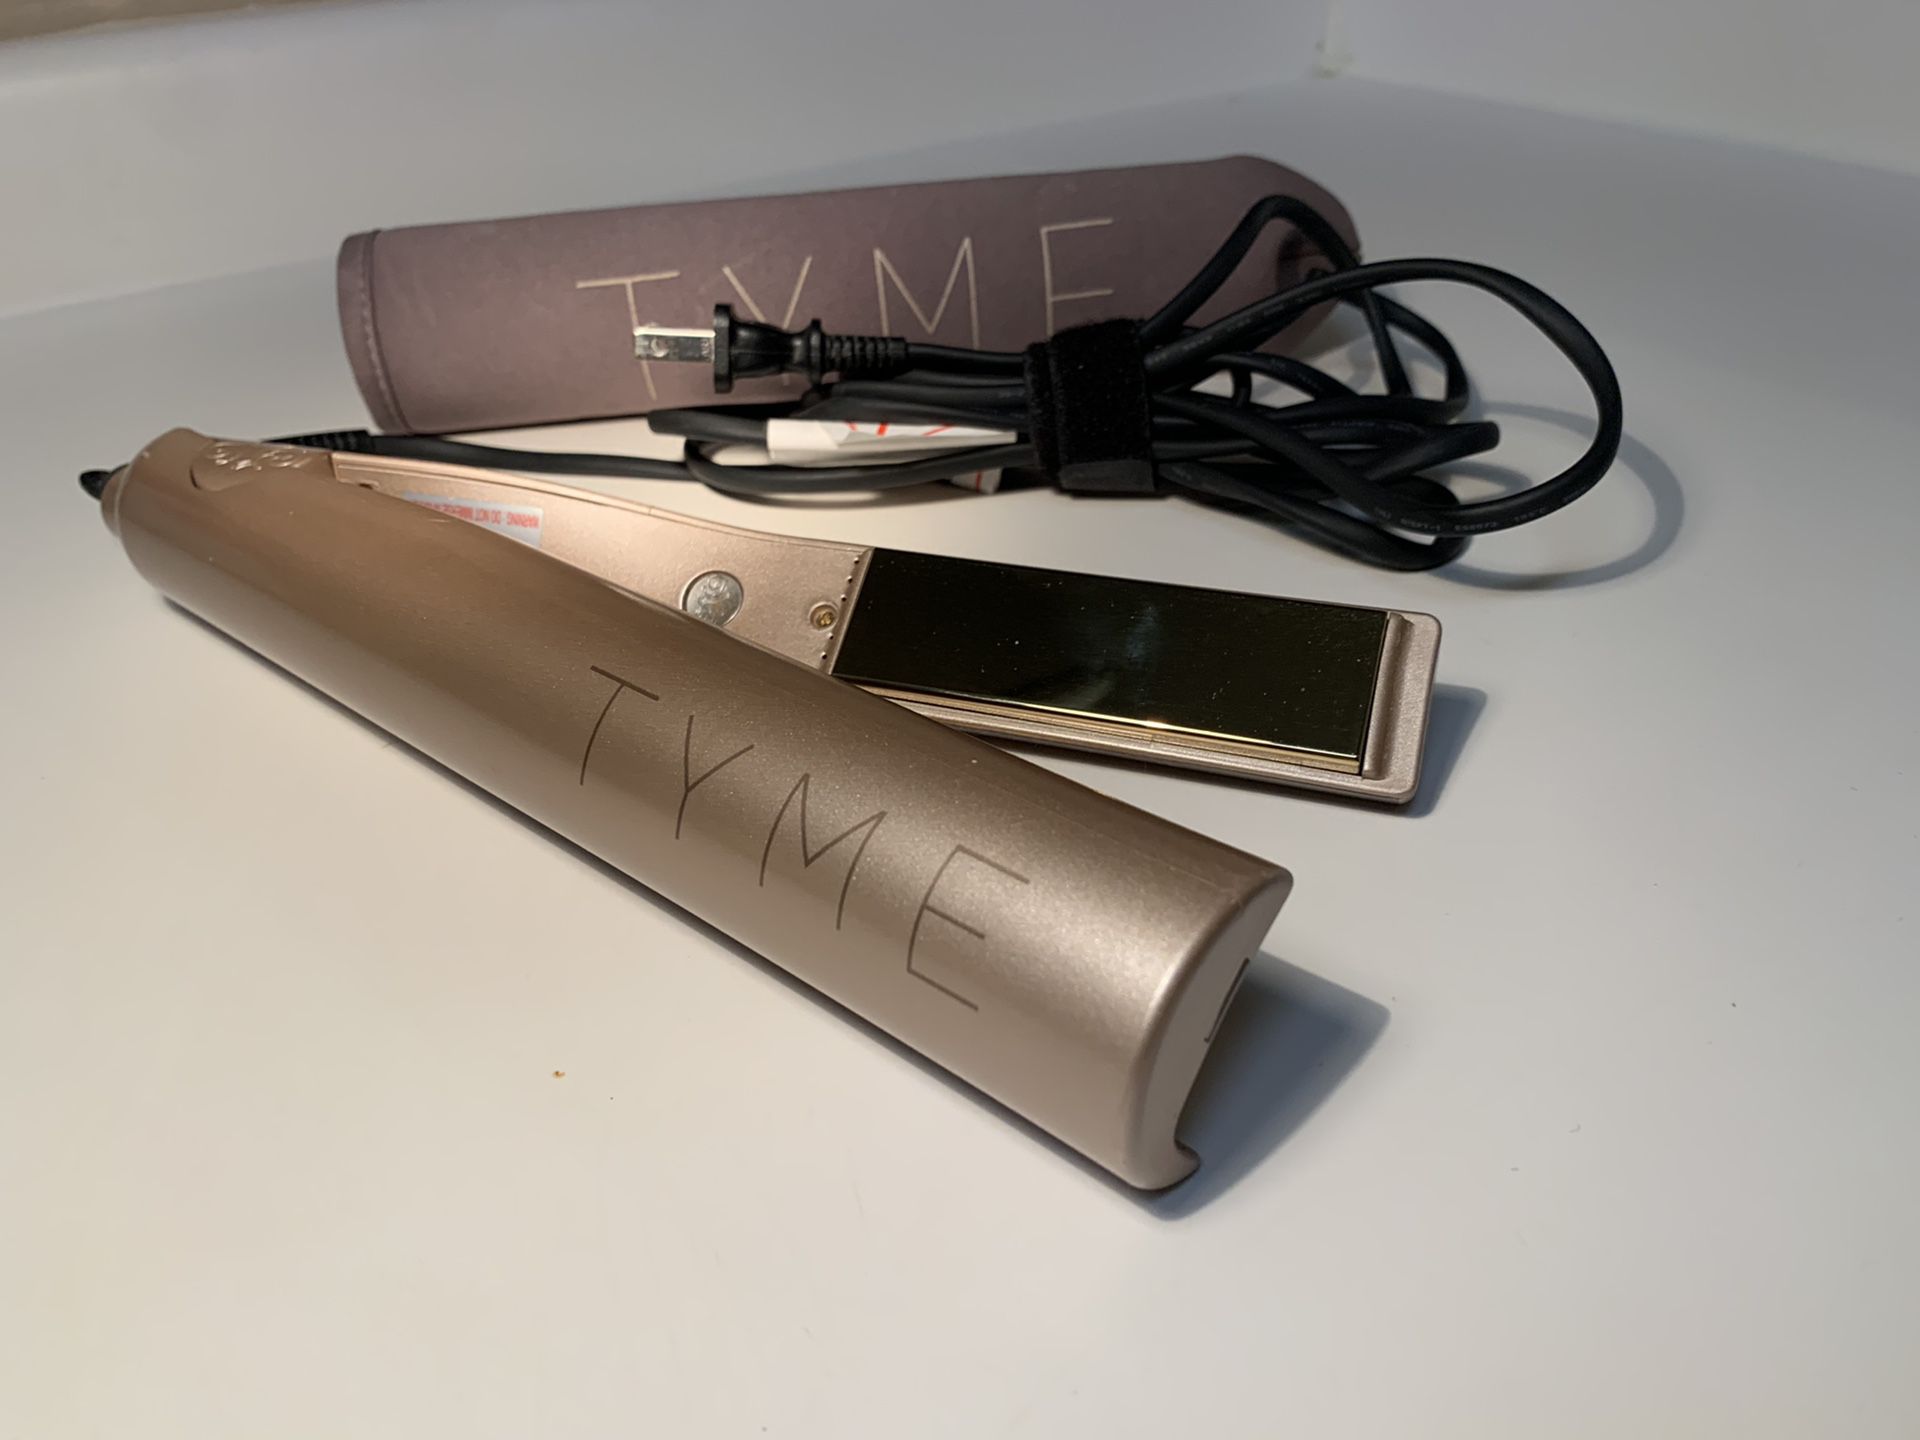 TYME Iron PRO styling hair tool curling iron hair straightener and hair wand